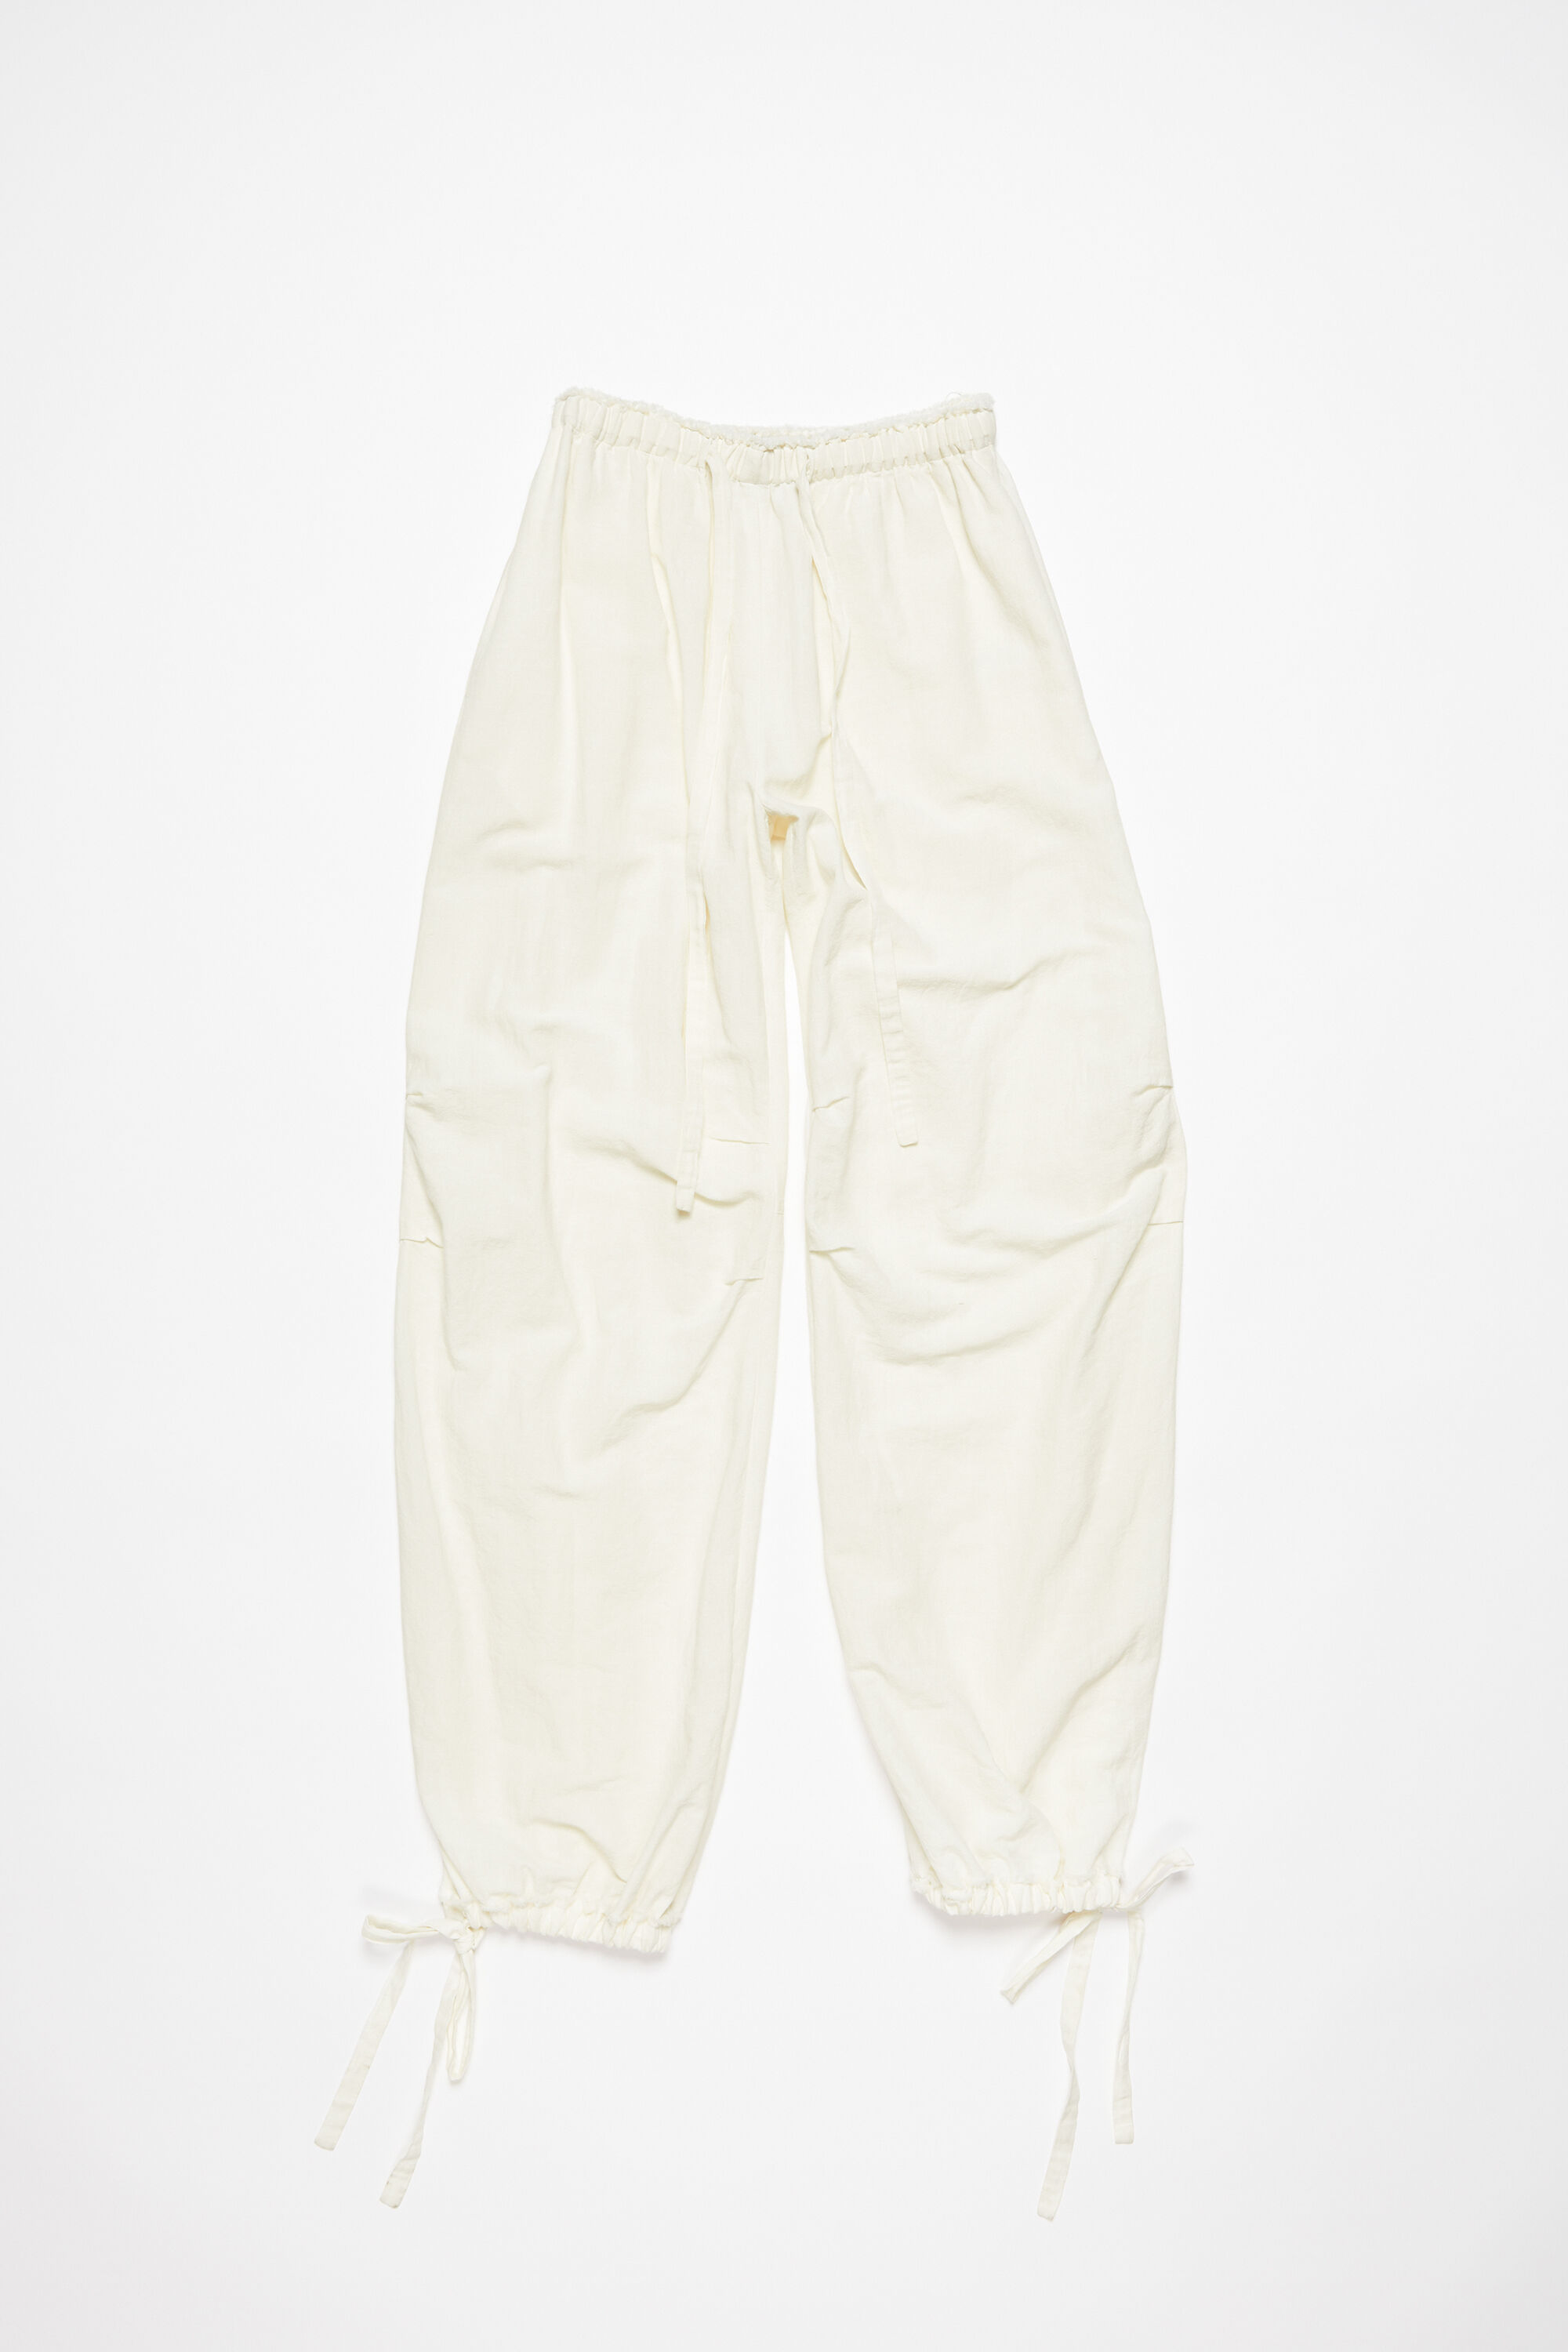 Acne Studios - Relaxed drawstring trousers - Warm white